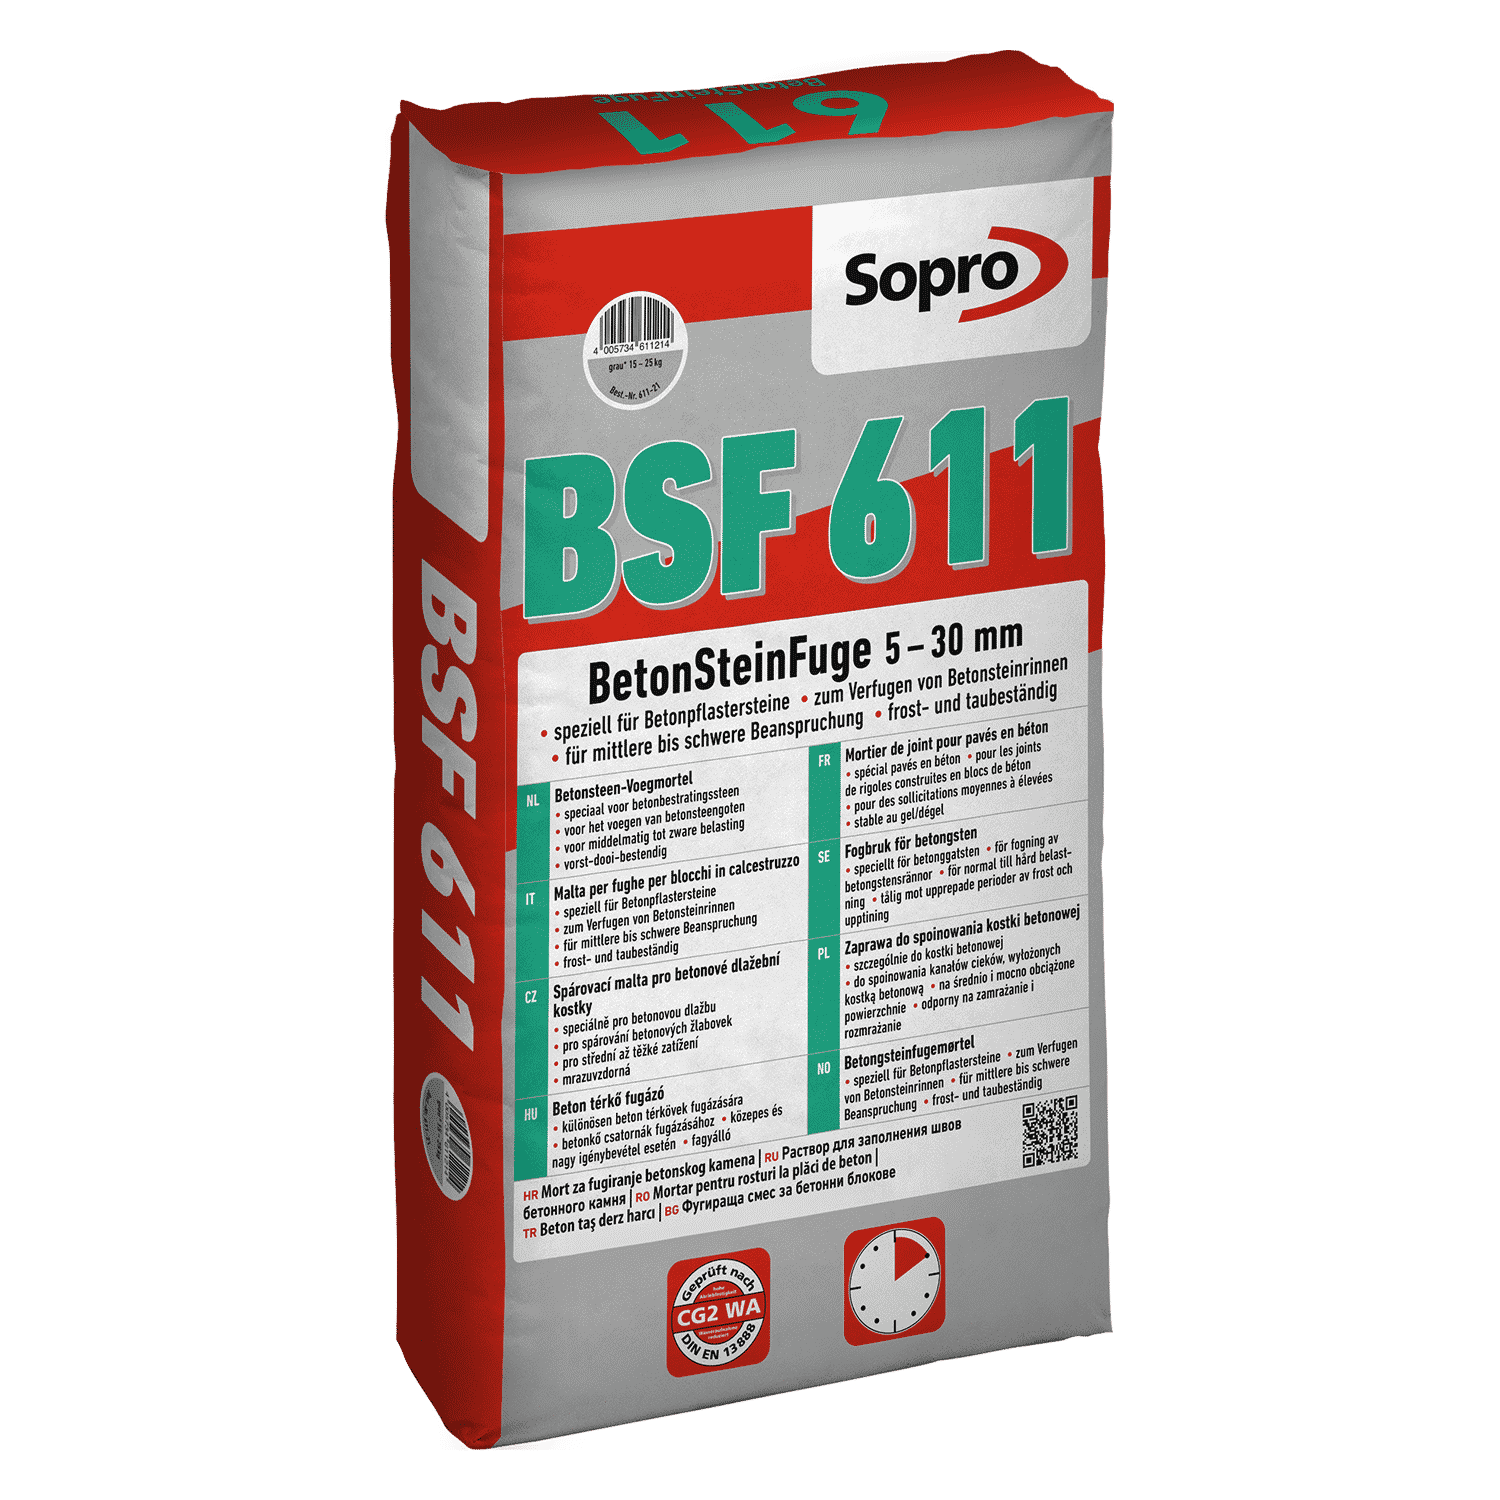 Sopro BSF 611 Paving grout for concrete units